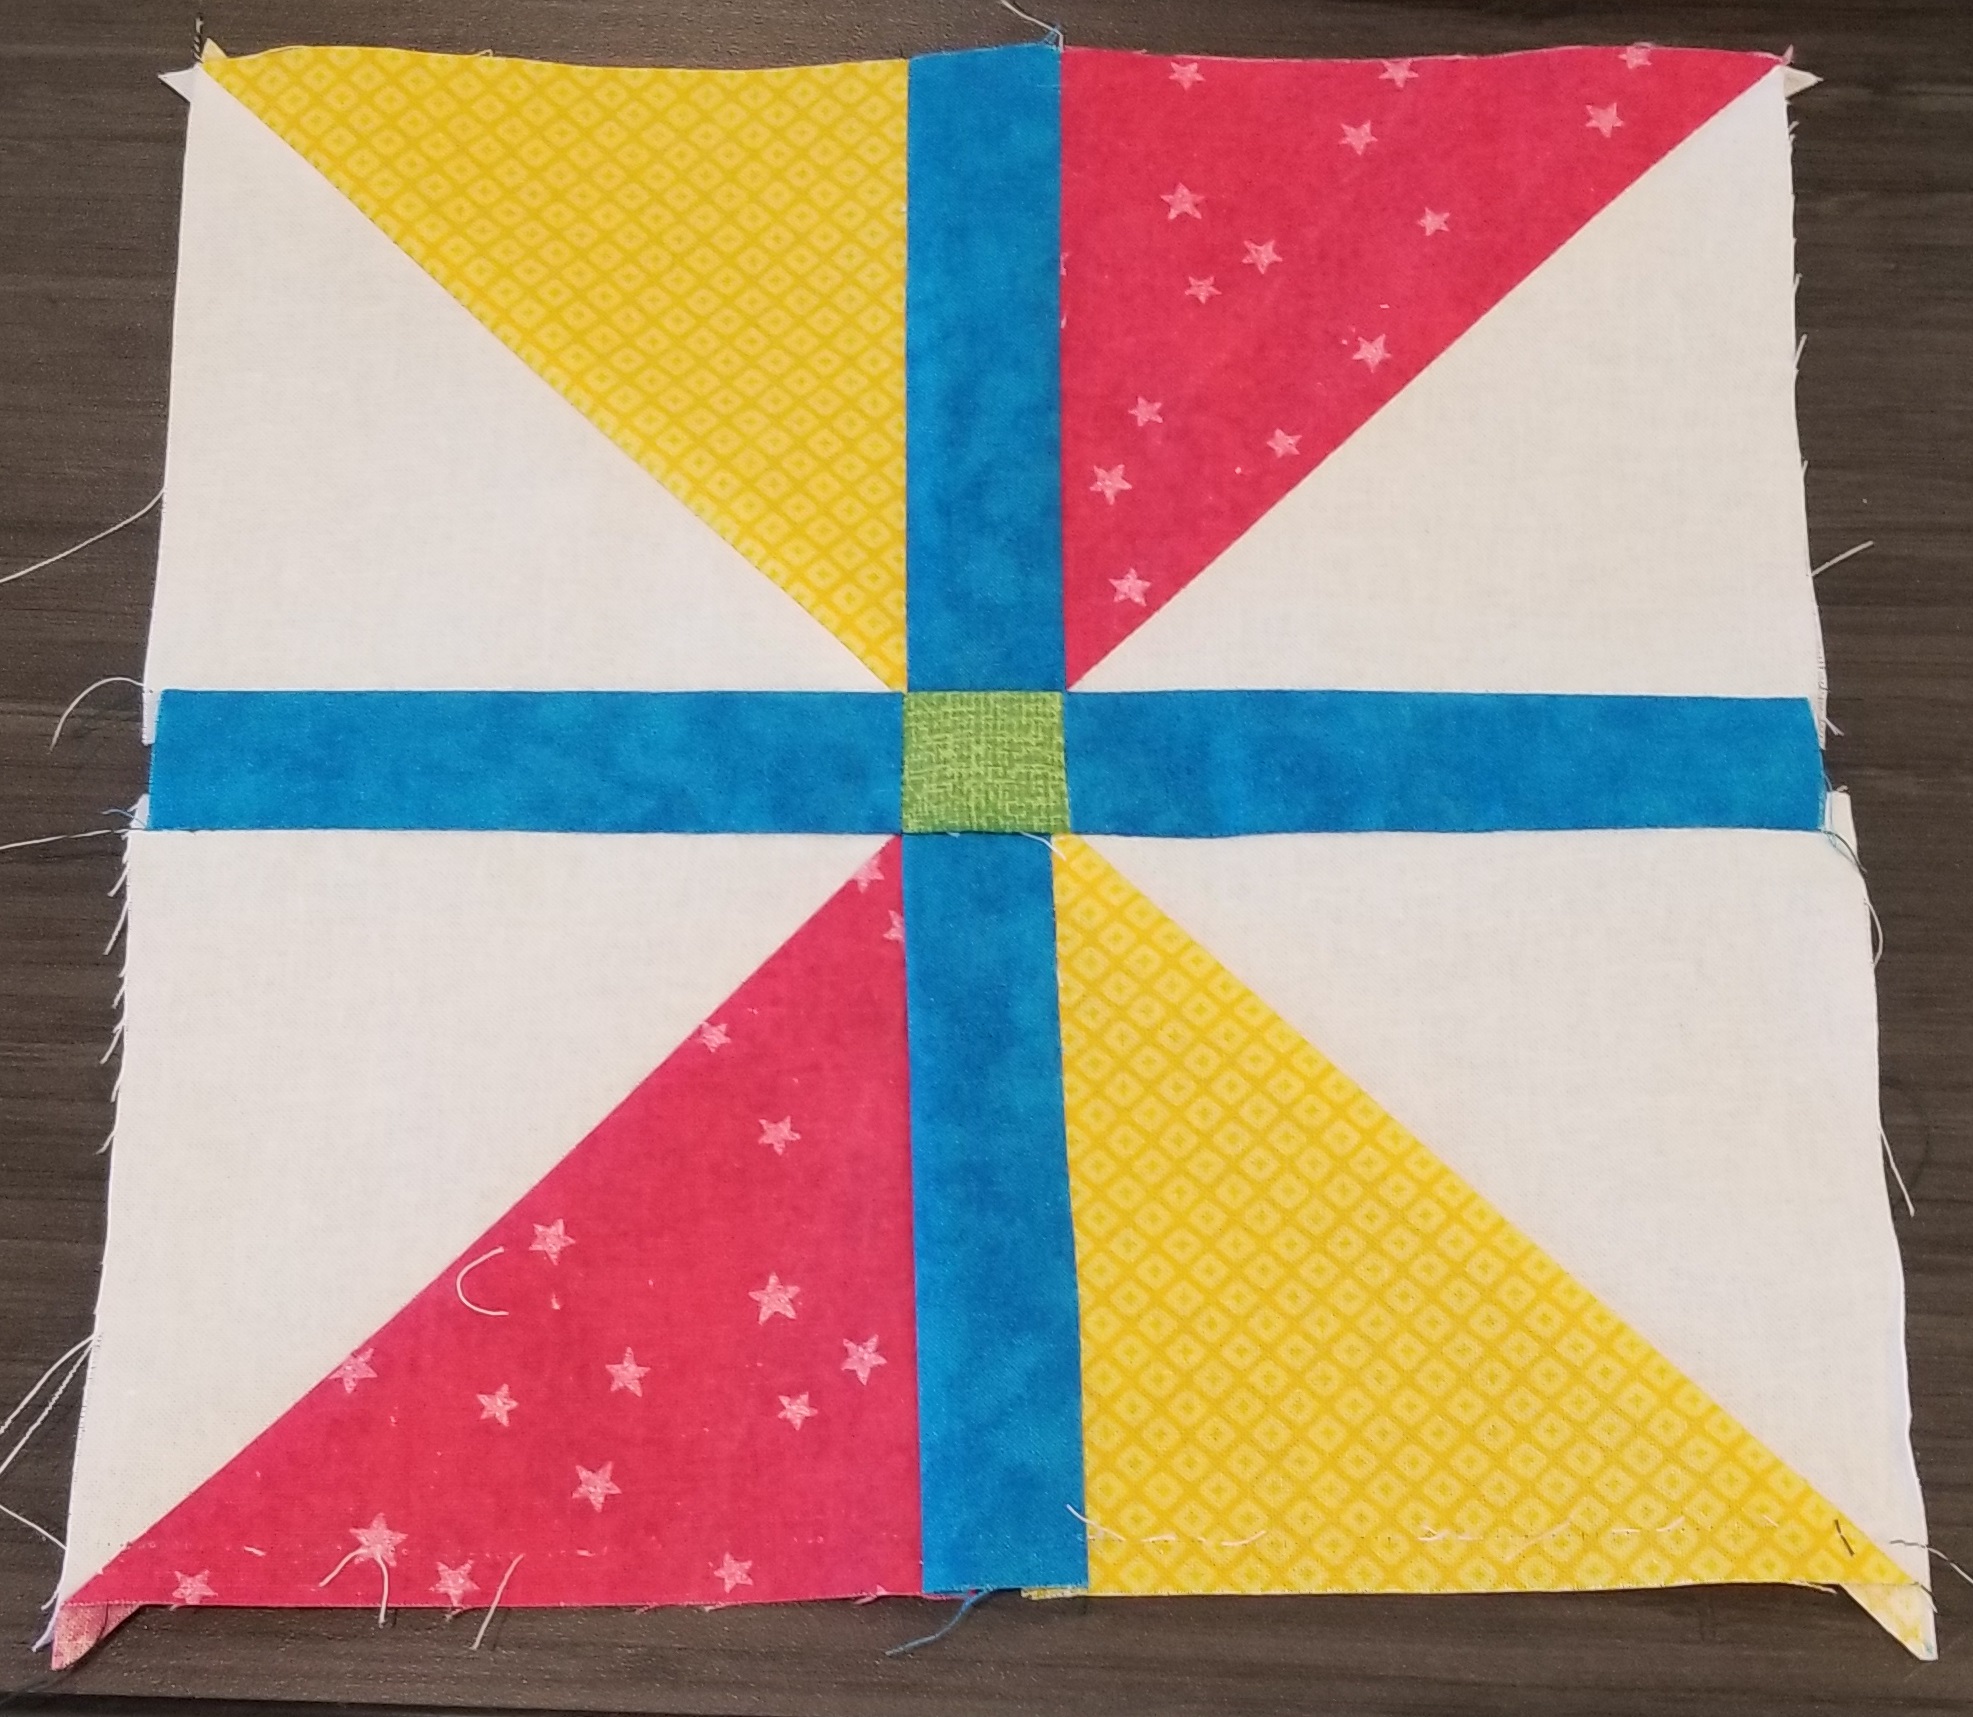 A windowpane quilt block in red, yellow, blue, white, and green